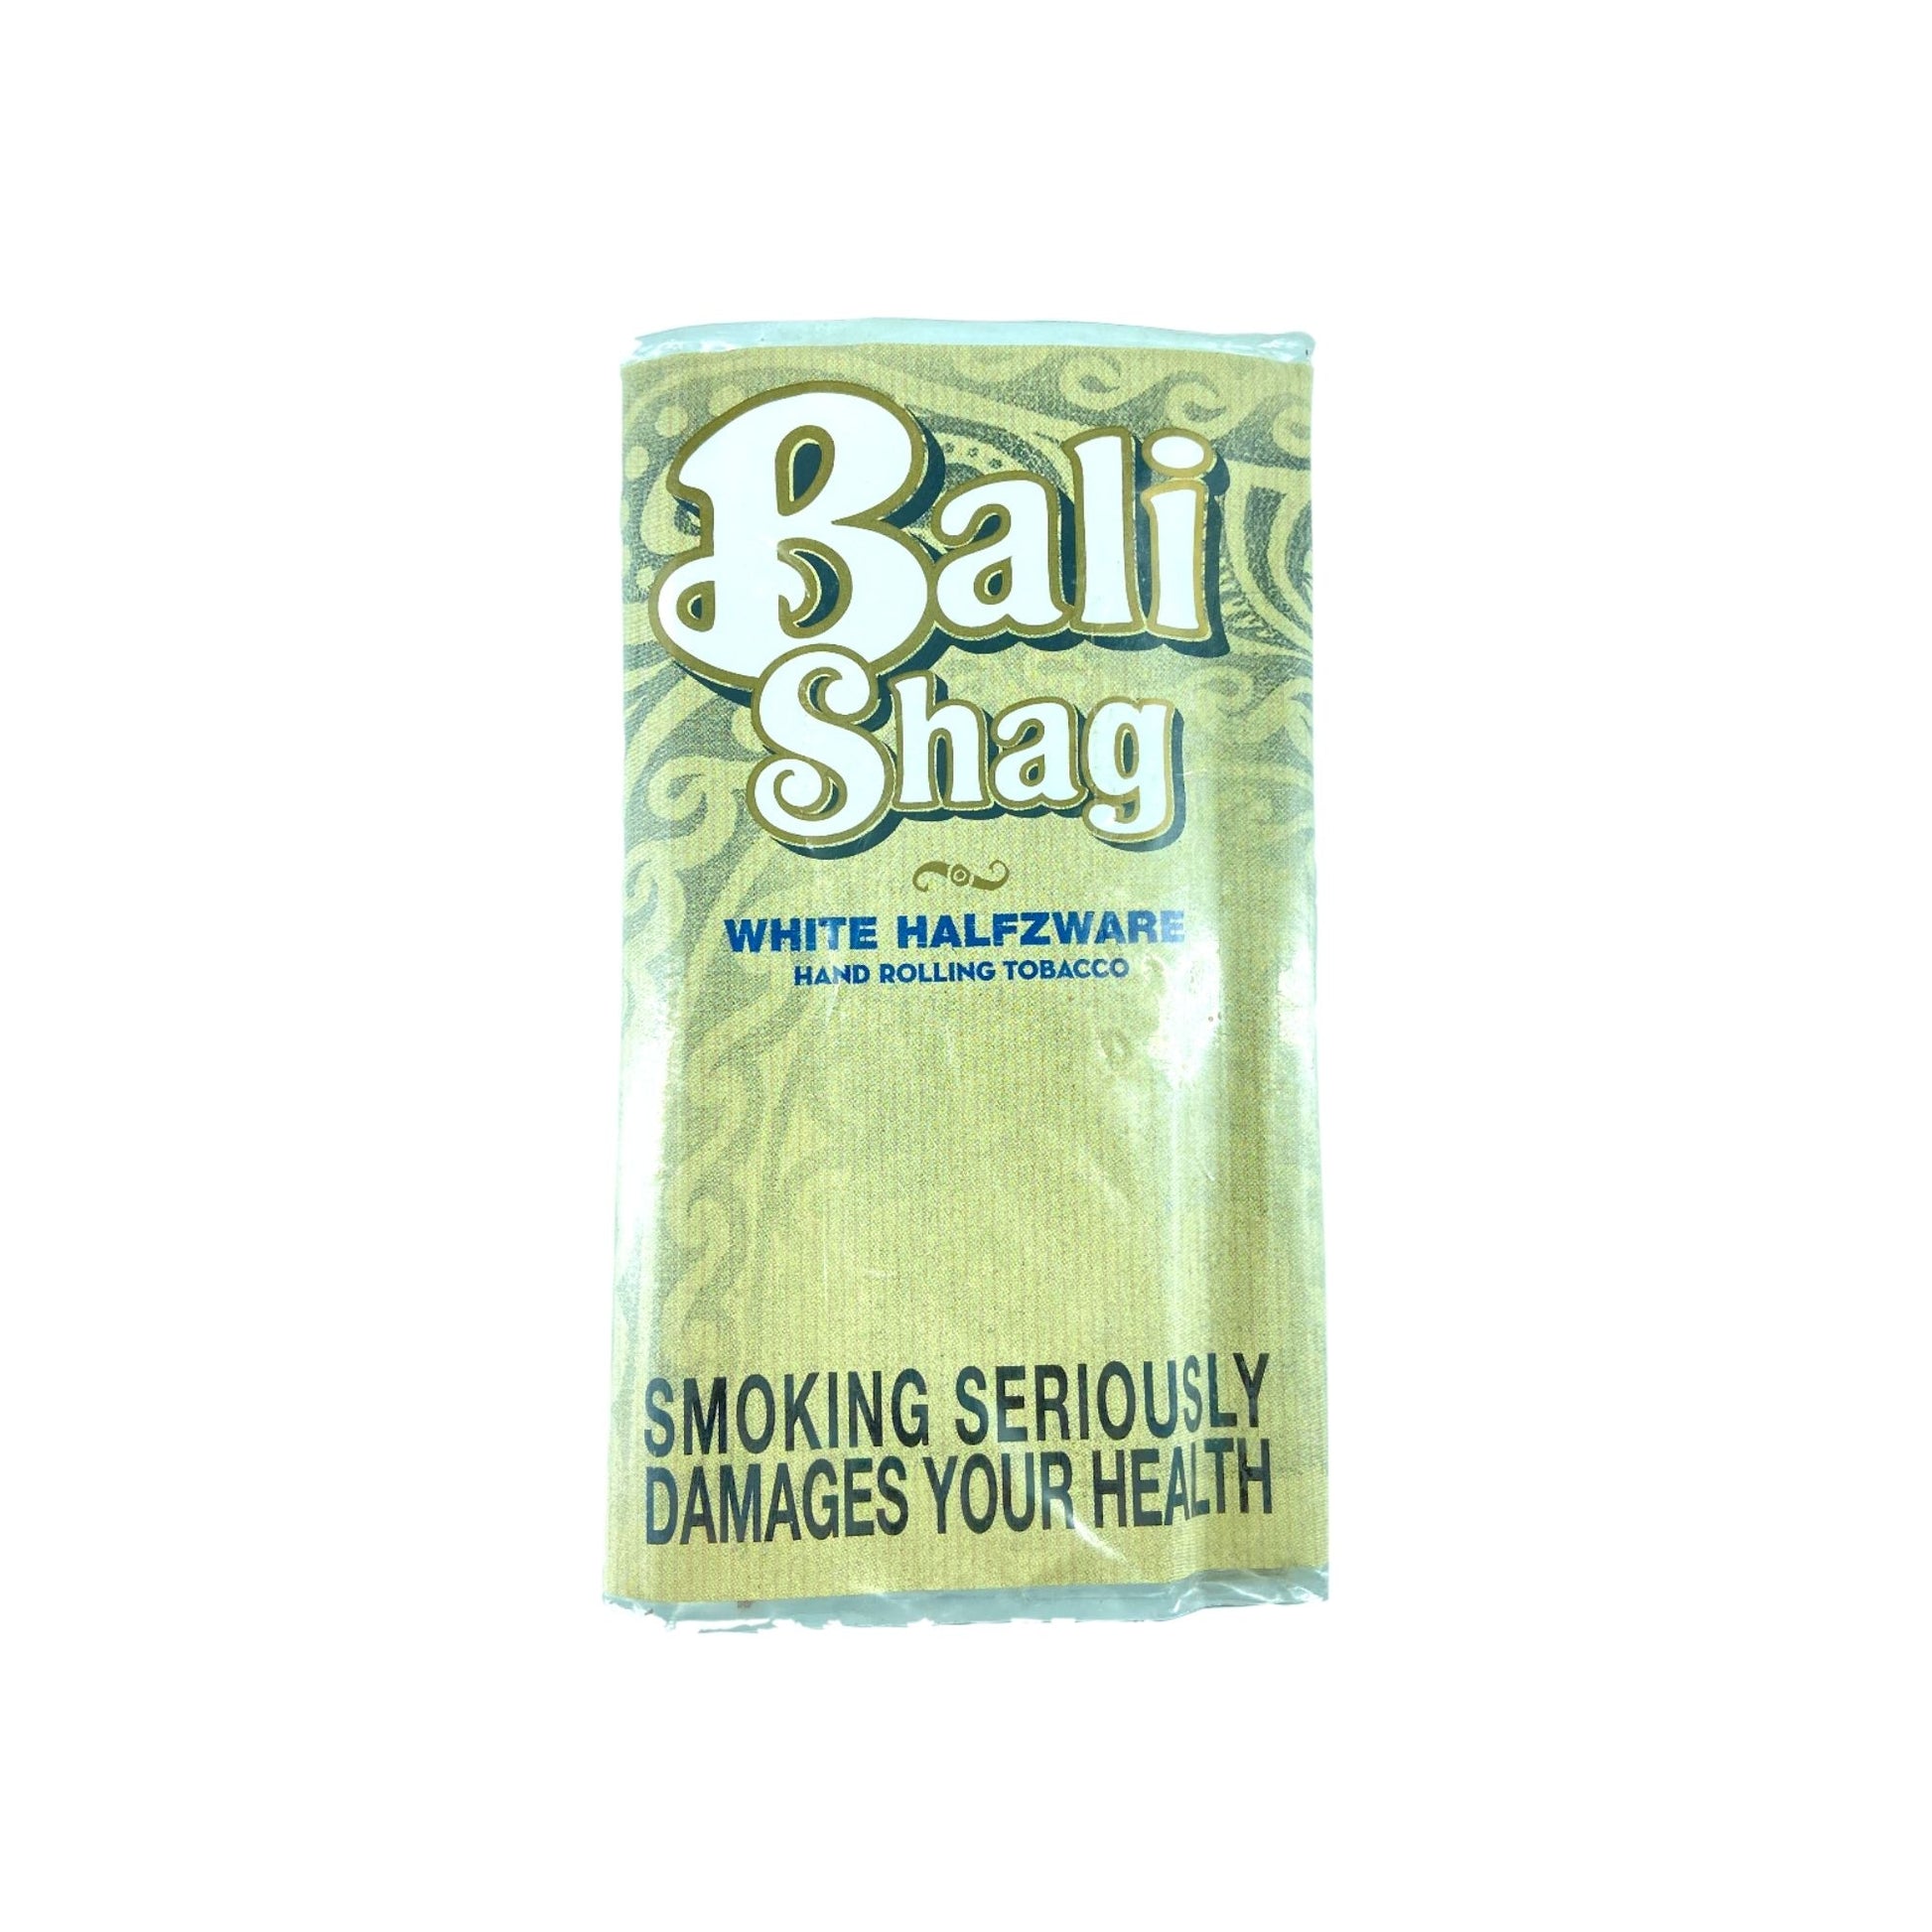 Buy Bali Shag White Halfzware Hand Rolling Tobacco online in India